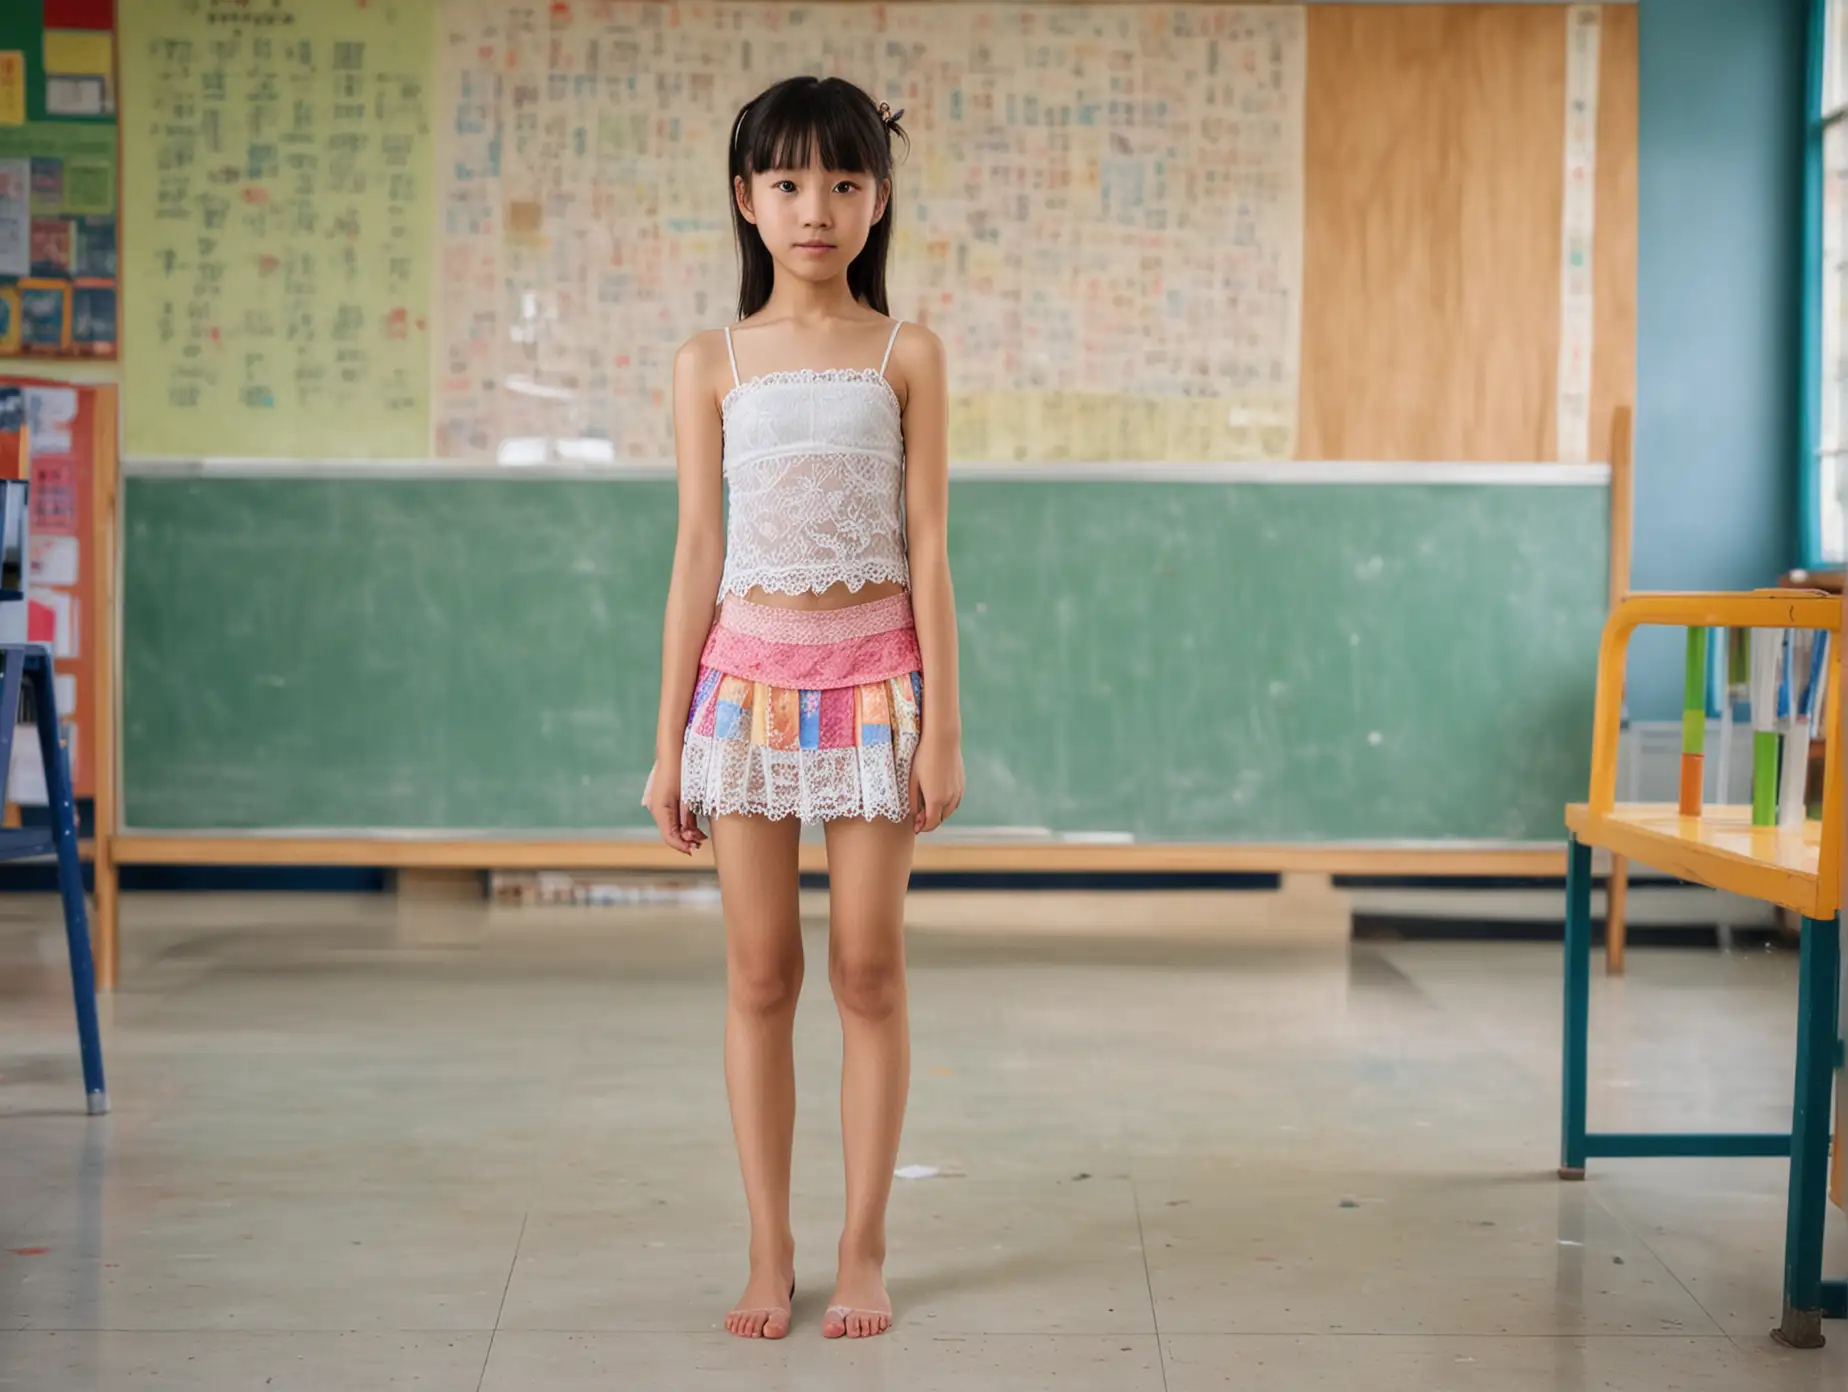 Skinny, cute, eleven year old Chinese girl with tiny lace tube top and tiny thin skirt standing barefoot in colorful school.